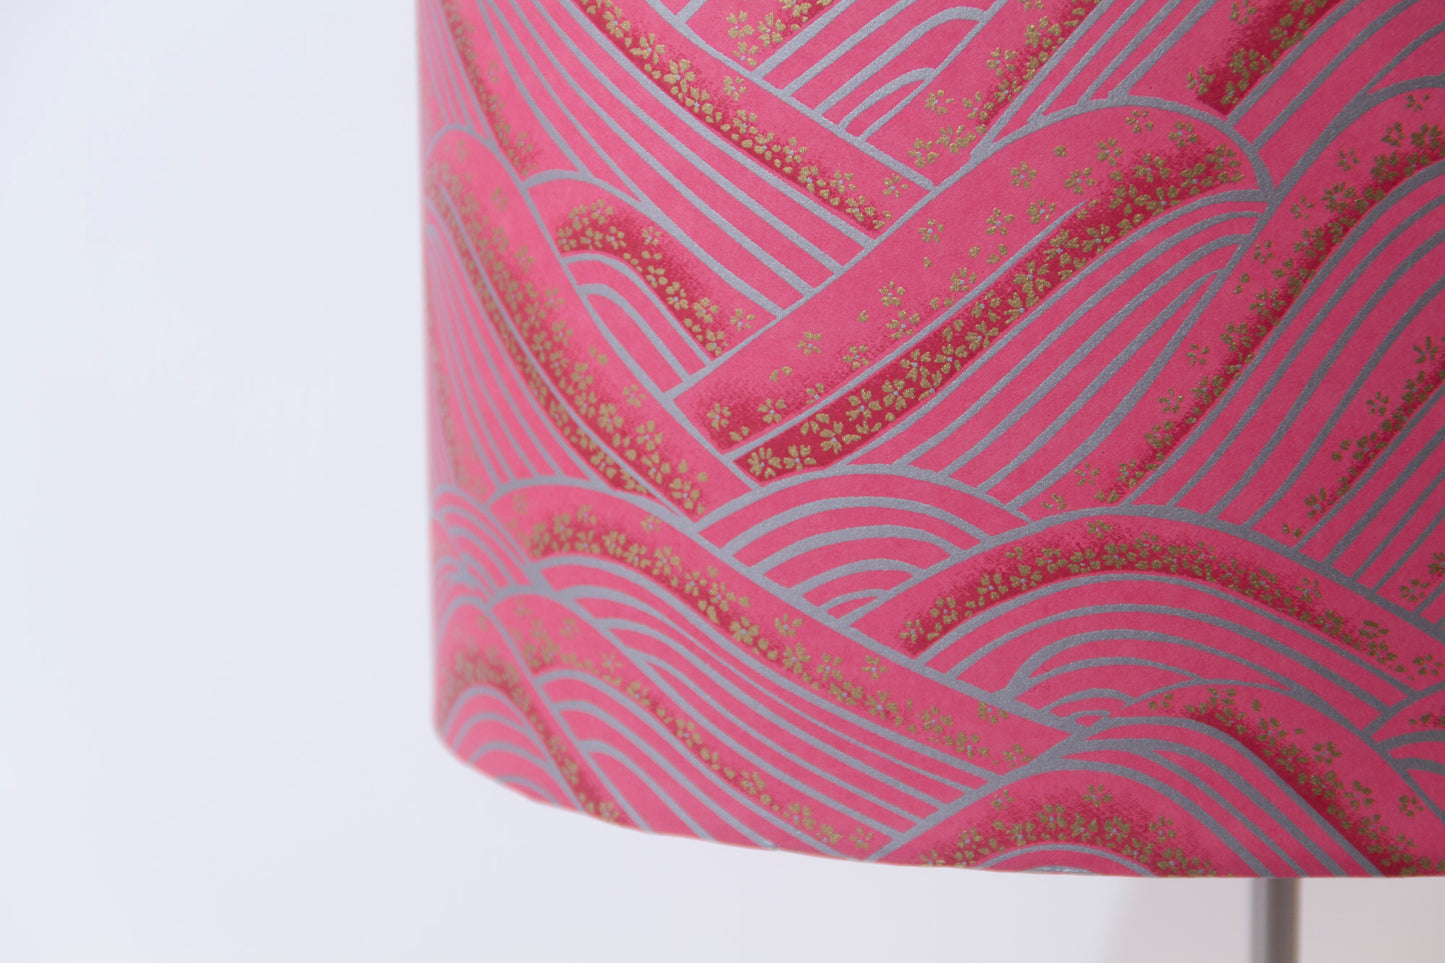 Square Lamp Shade - W04 ~ Pink Hills with Gold Flowers, 40cm(w) x 20cm(h) x 40cm(d)